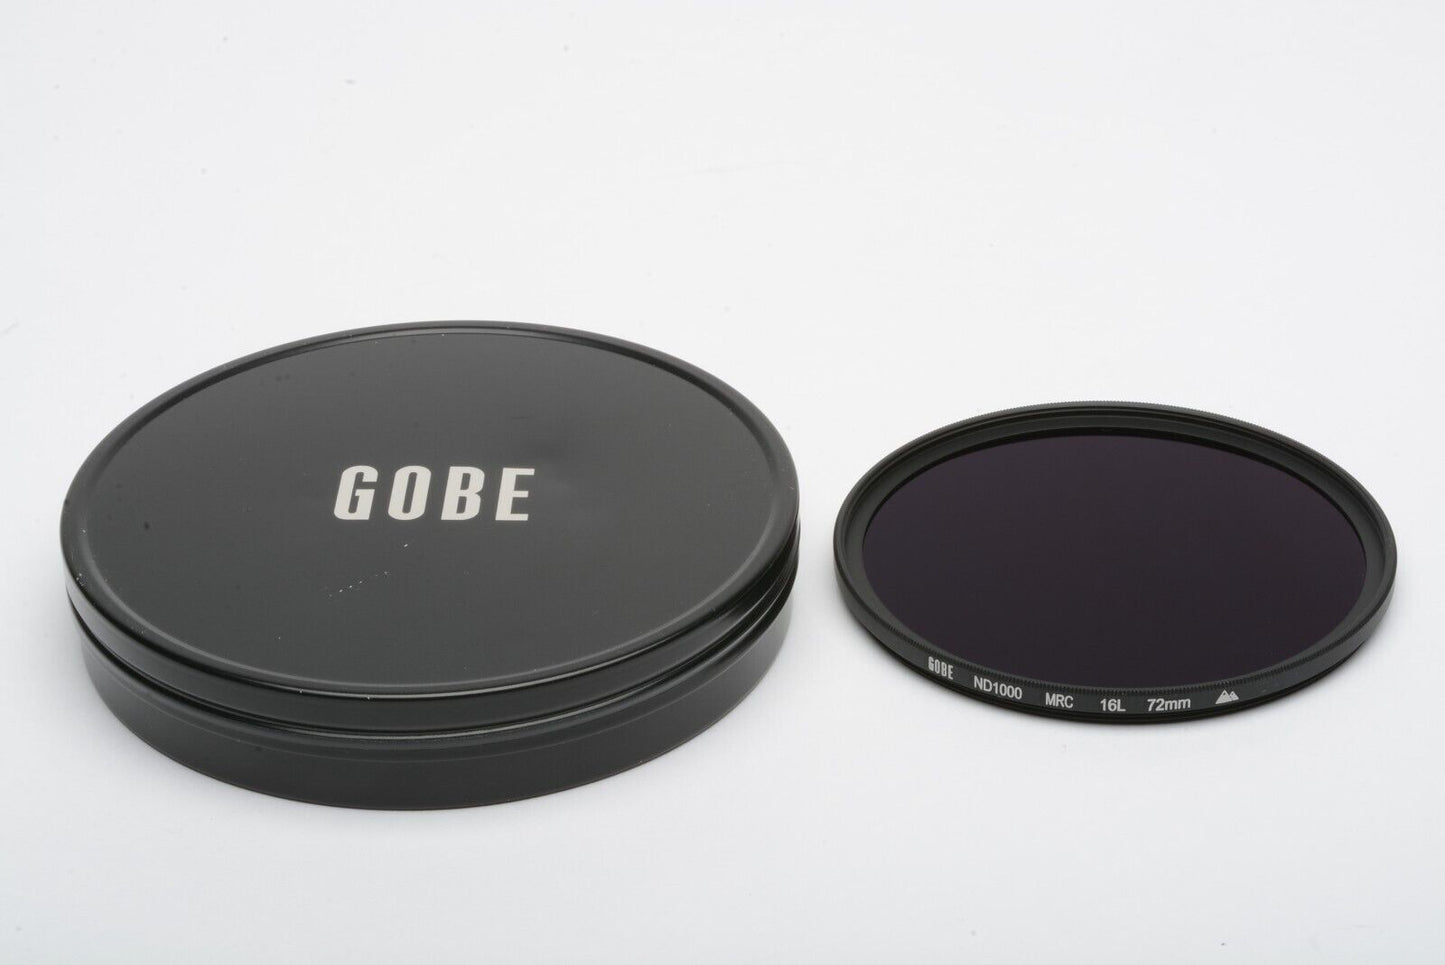 MINT- GOBE 72mm ND1000 (10 Stop) ND FILTER IN CASE, BARELY USED